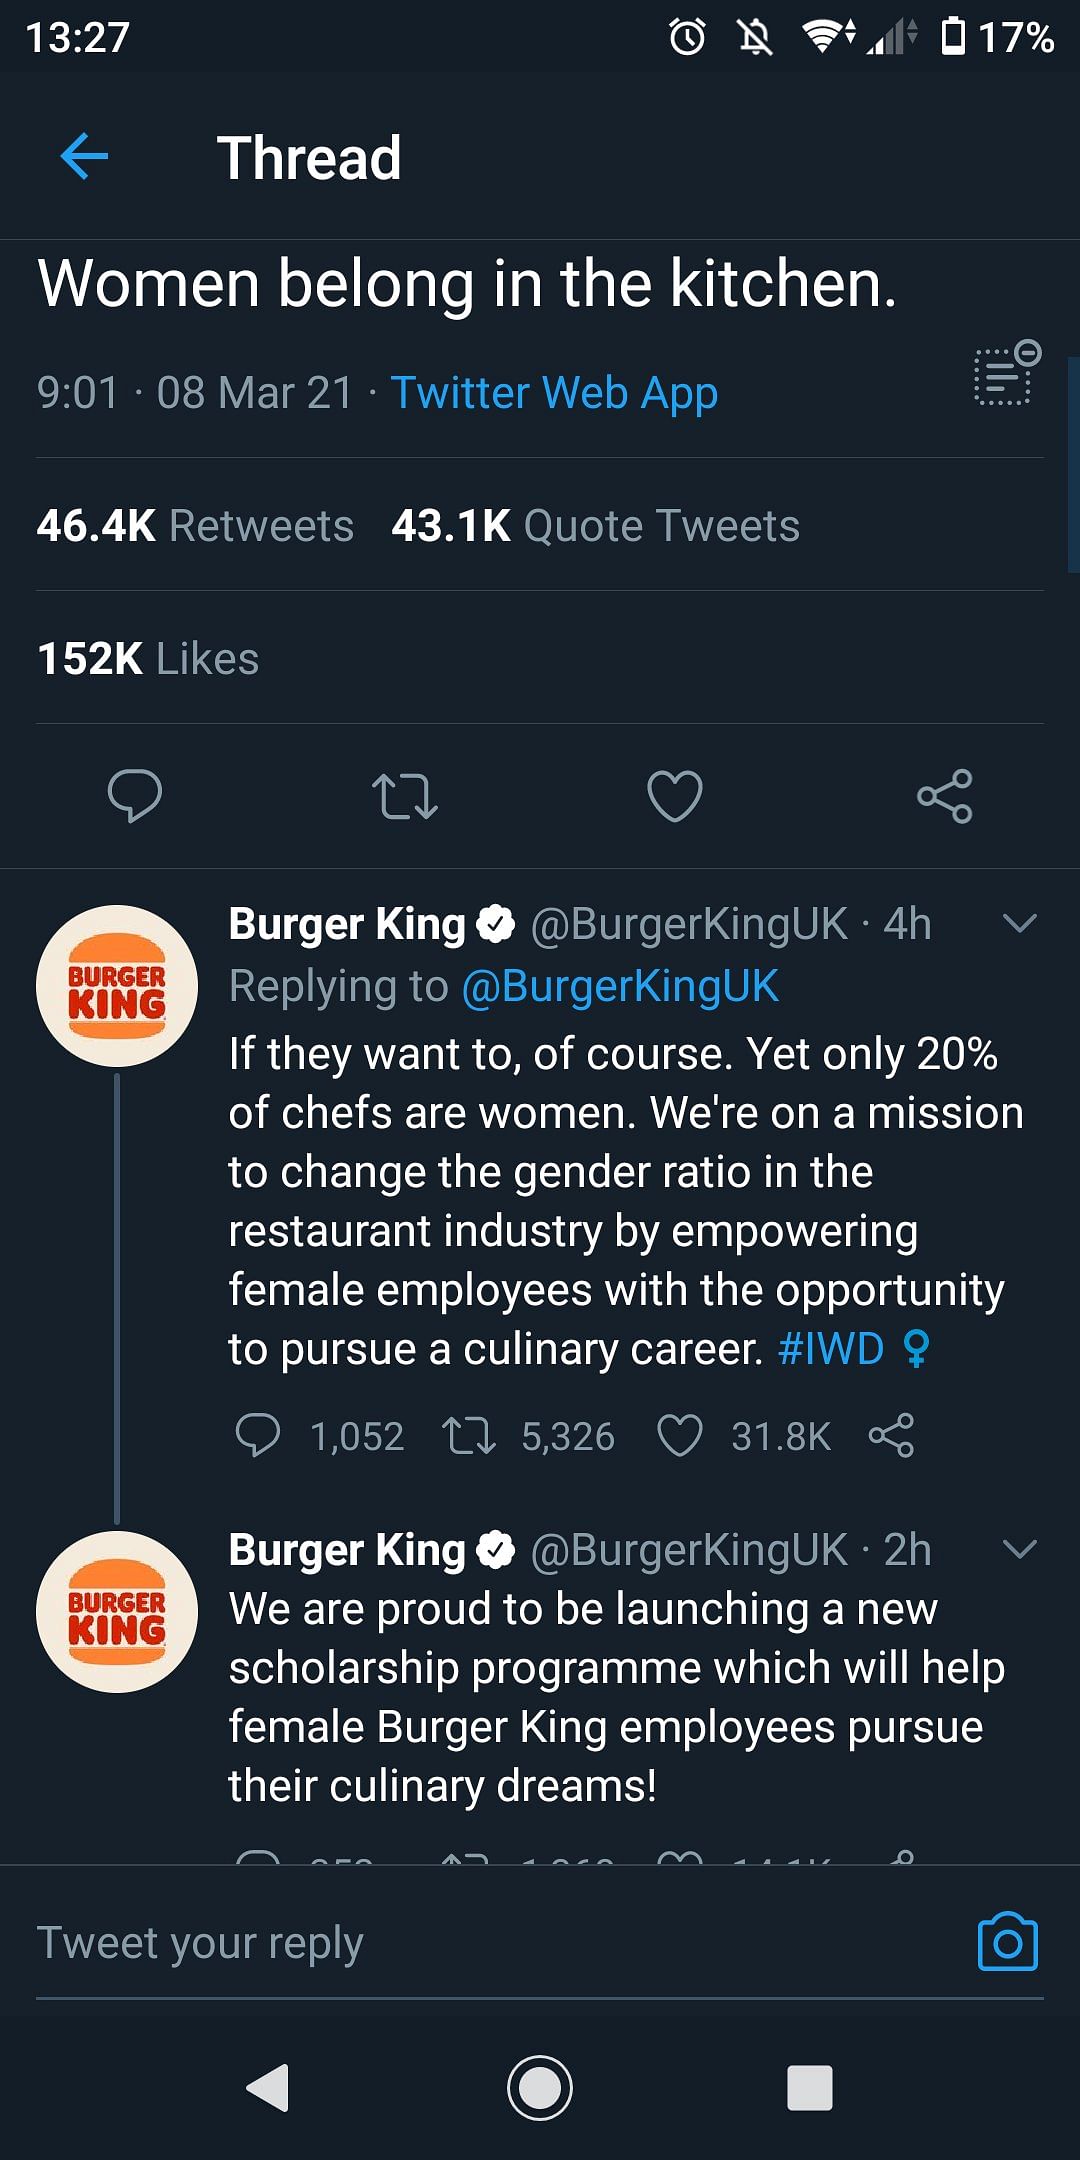 Burger King UK apologises after its Women’s Day tweet is dubbed sexist and tone-deaf